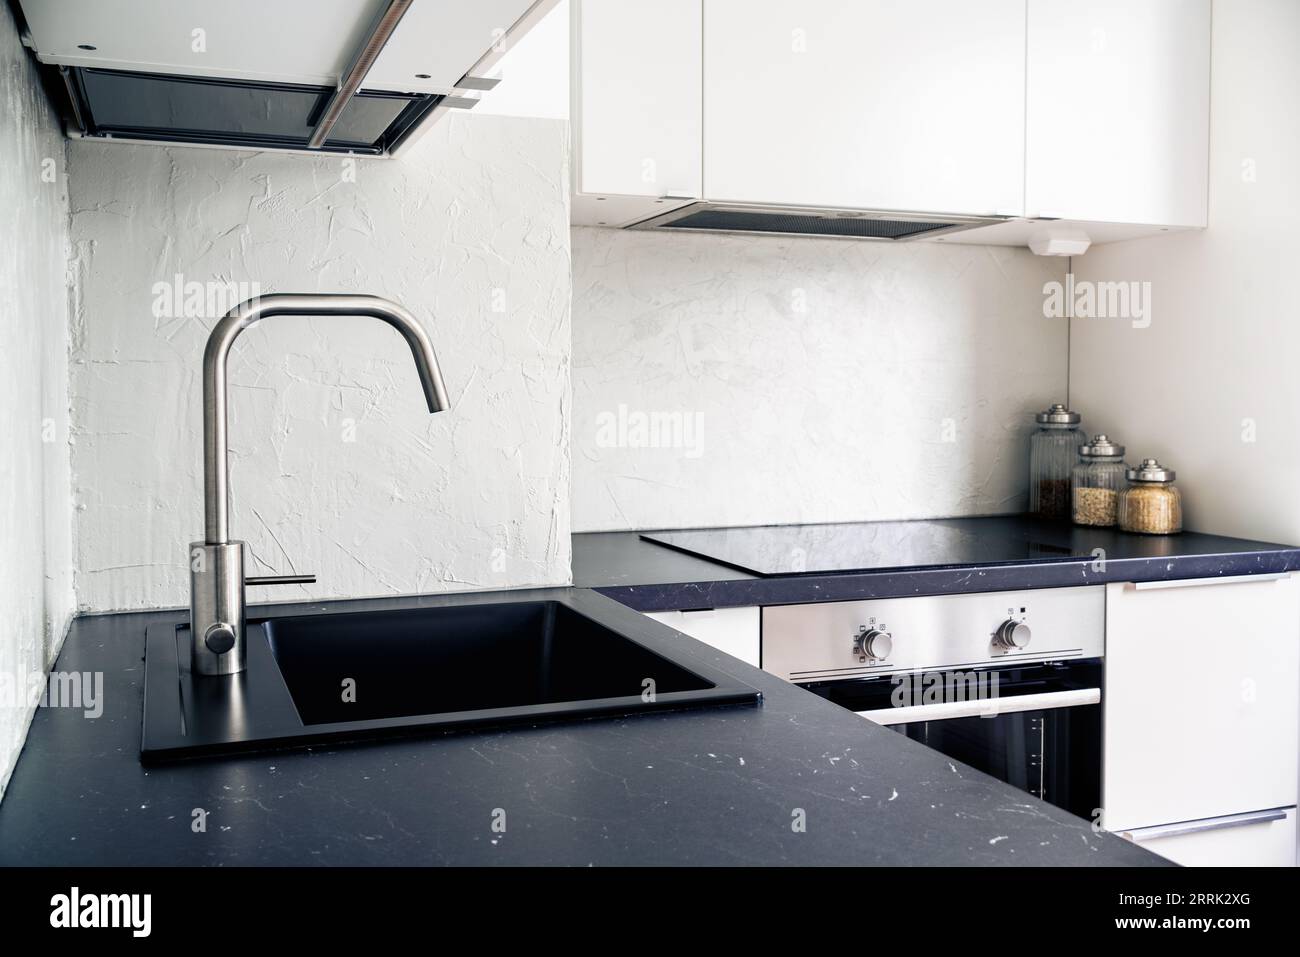 Kitchen counter top, faucet, water tap and sink. White and black Scandinavian interior design in modern apartment and home. Induction cooker stove. Stock Photo